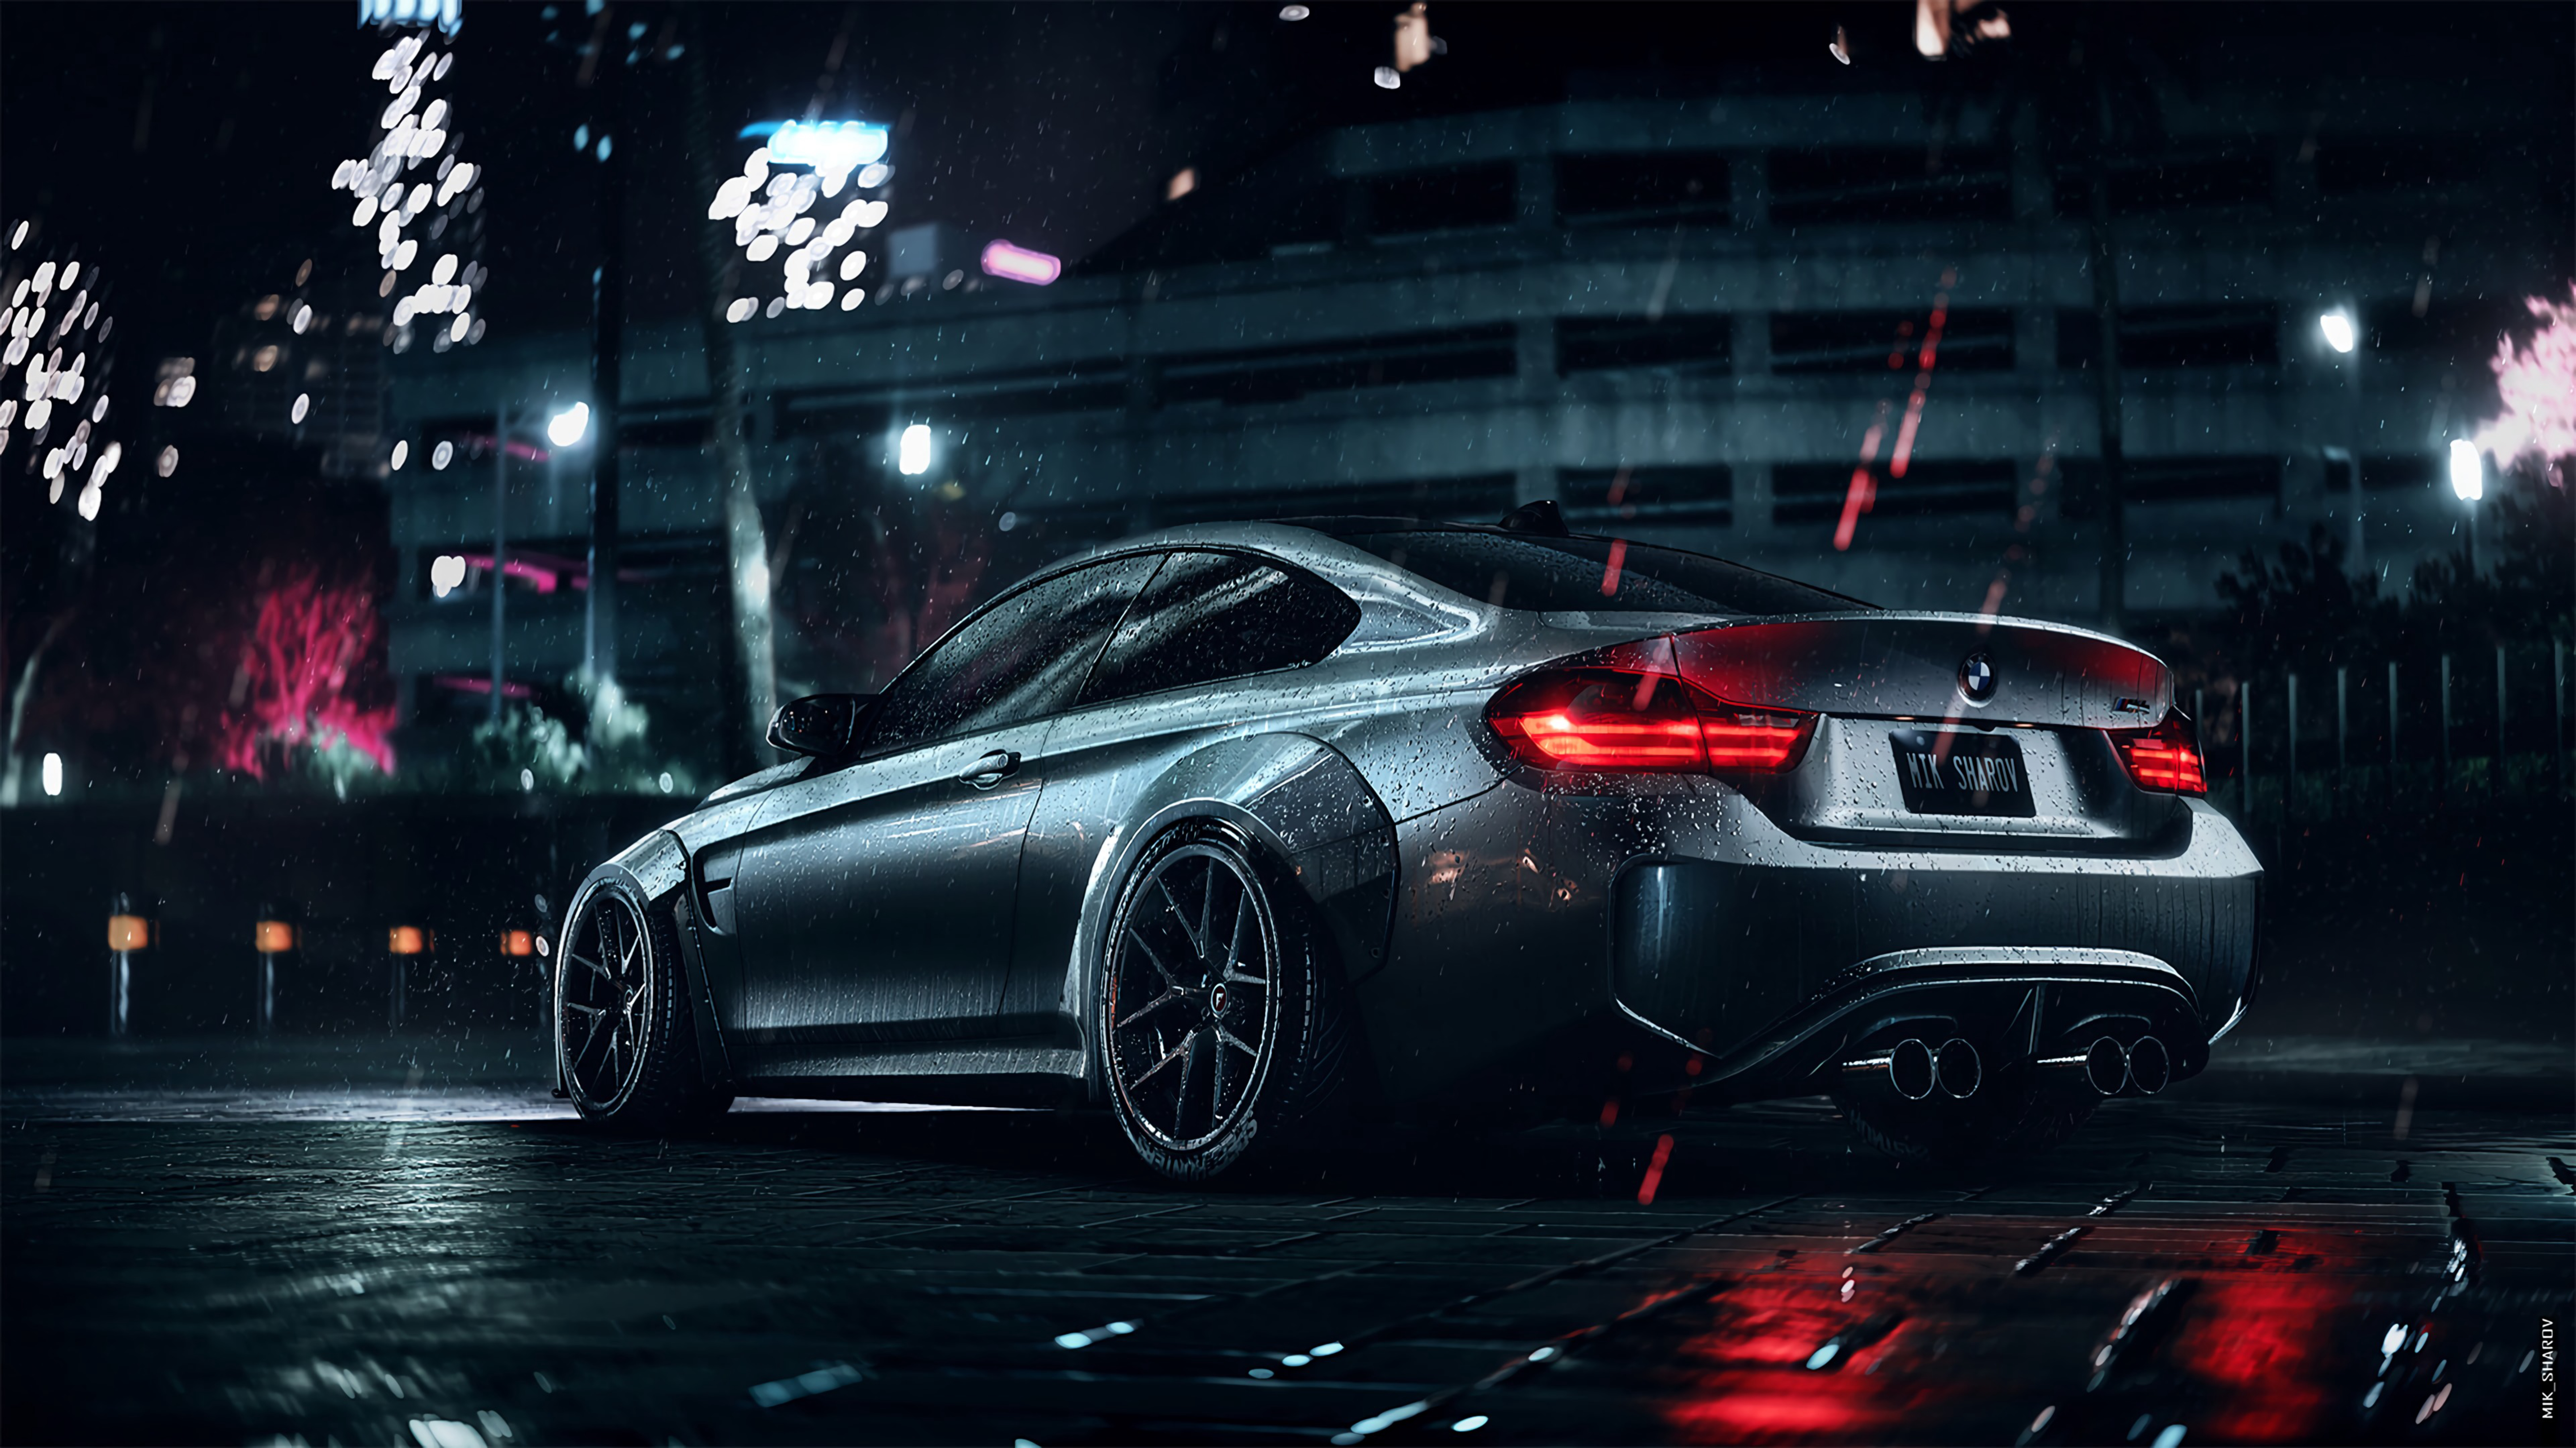 72372 download wallpaper cars, night, grey, sports, bmw, wet, car, machine, metallic, coupe, compartment screensavers and pictures for free